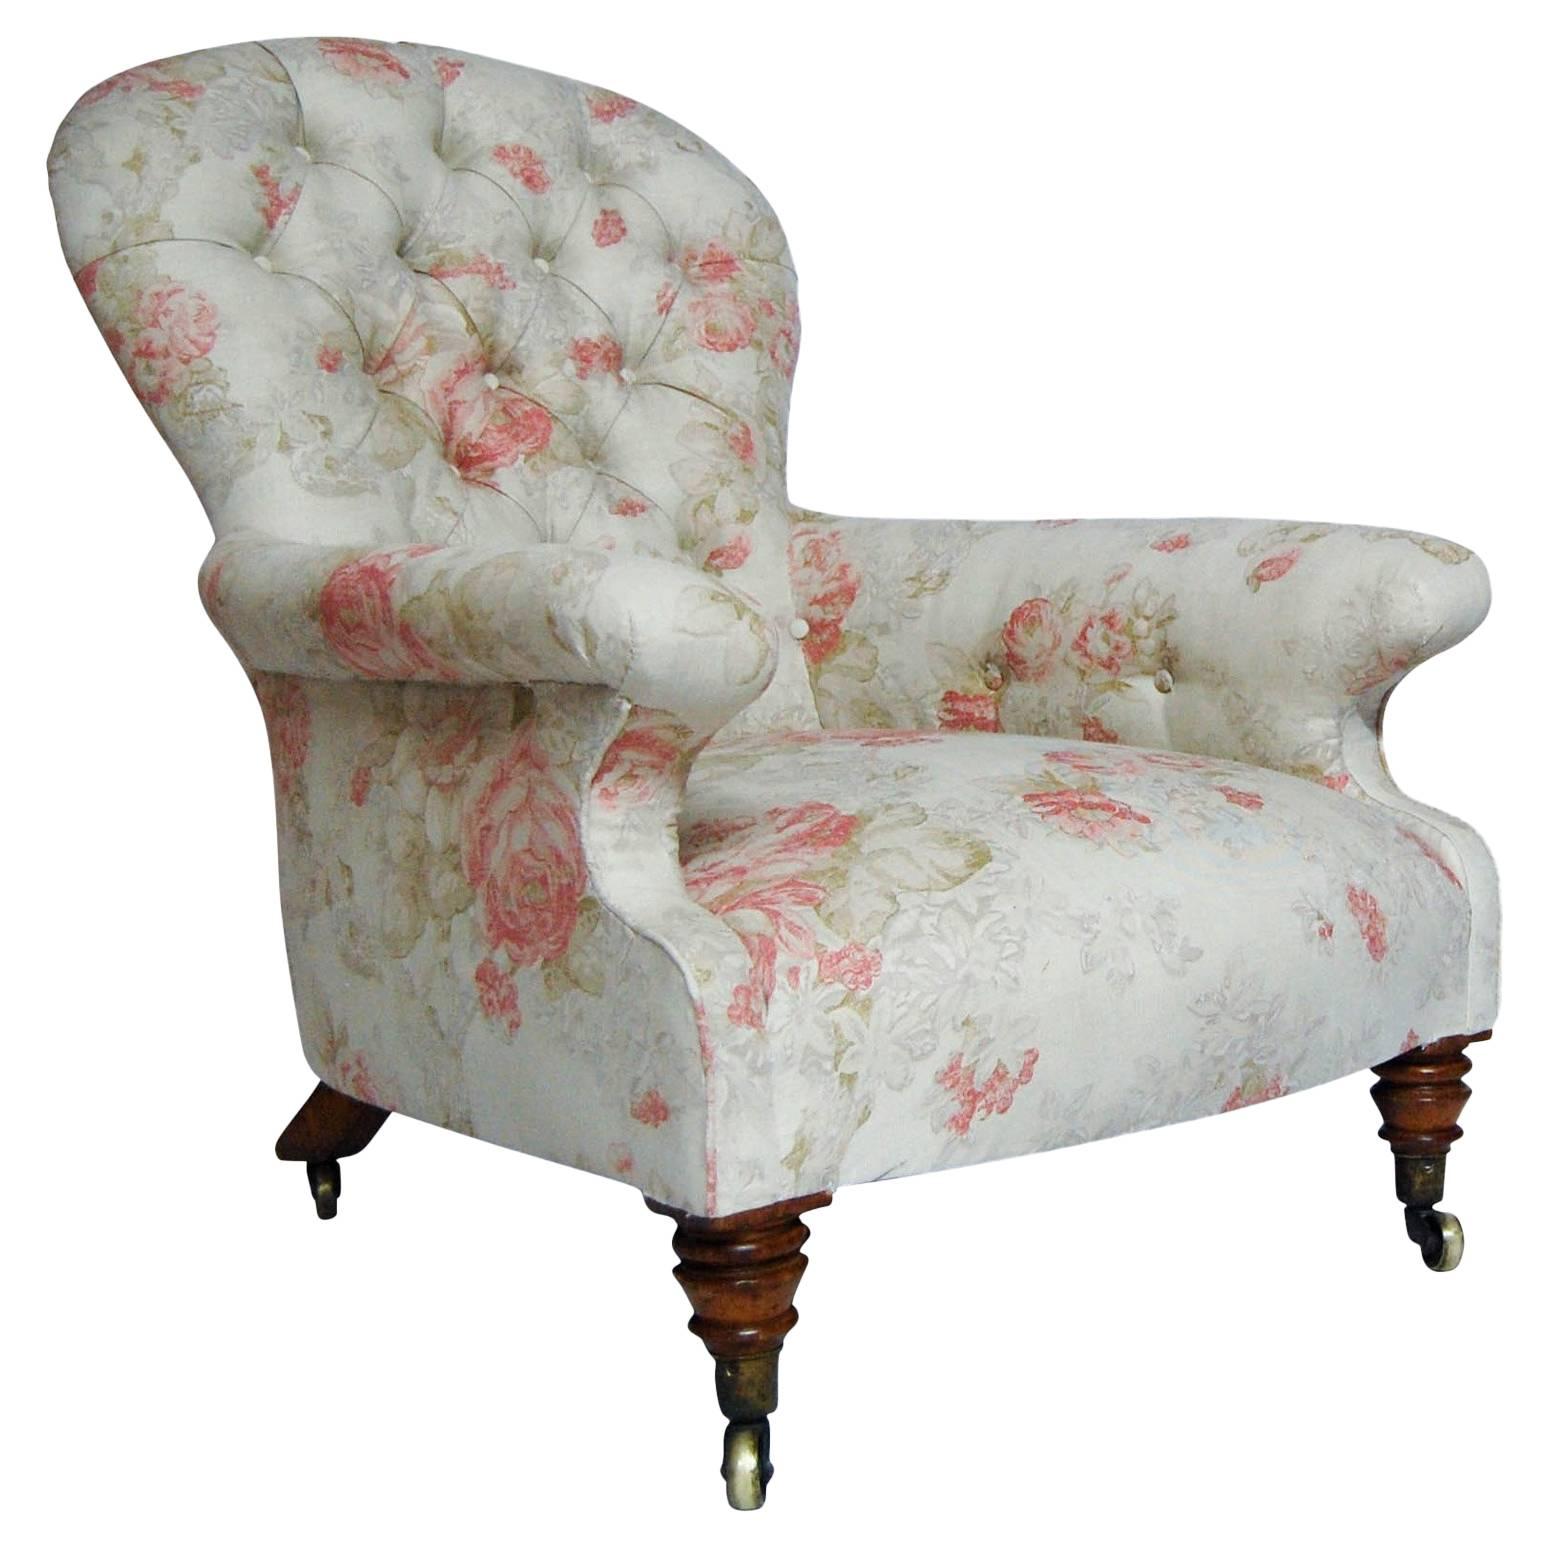 William IV Upholstered Spoon Back Armchair